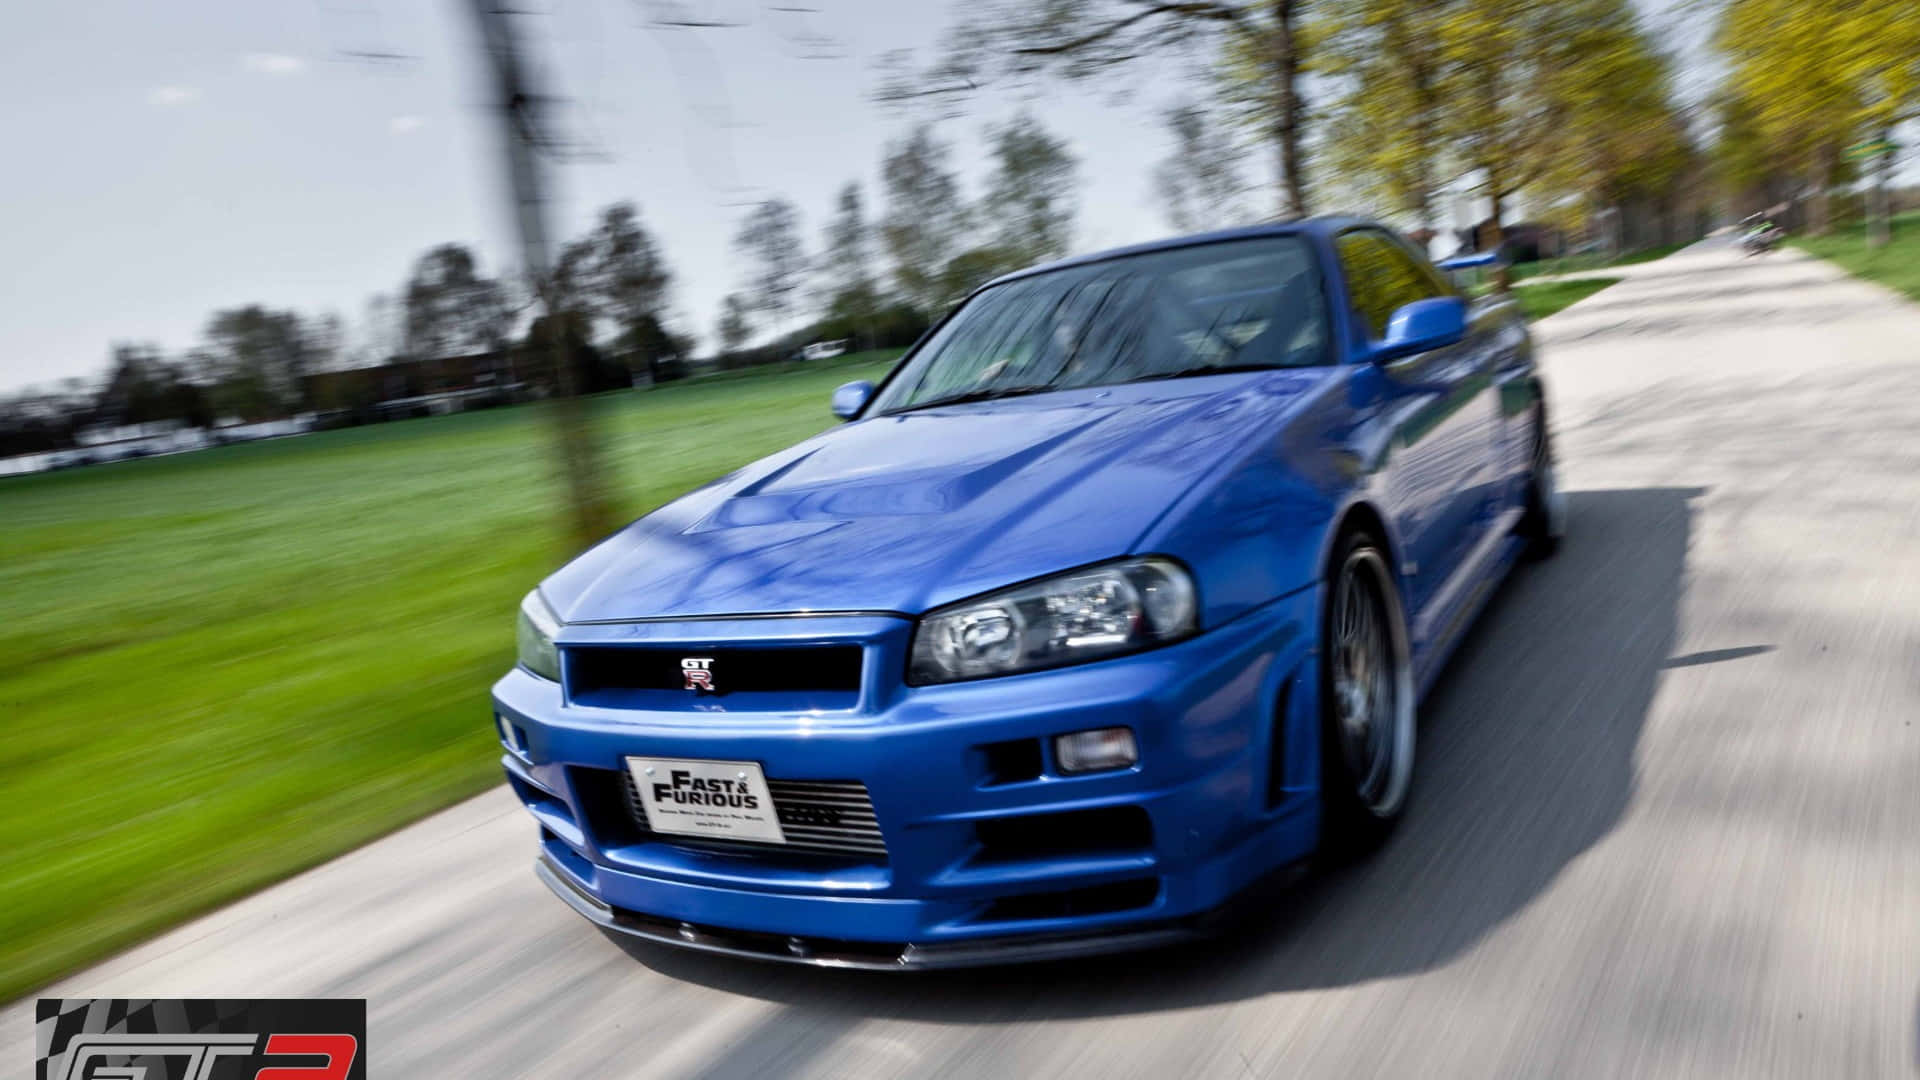 Paul Walker speeding down the highway in a fast and furious Nissan Skyline. Wallpaper